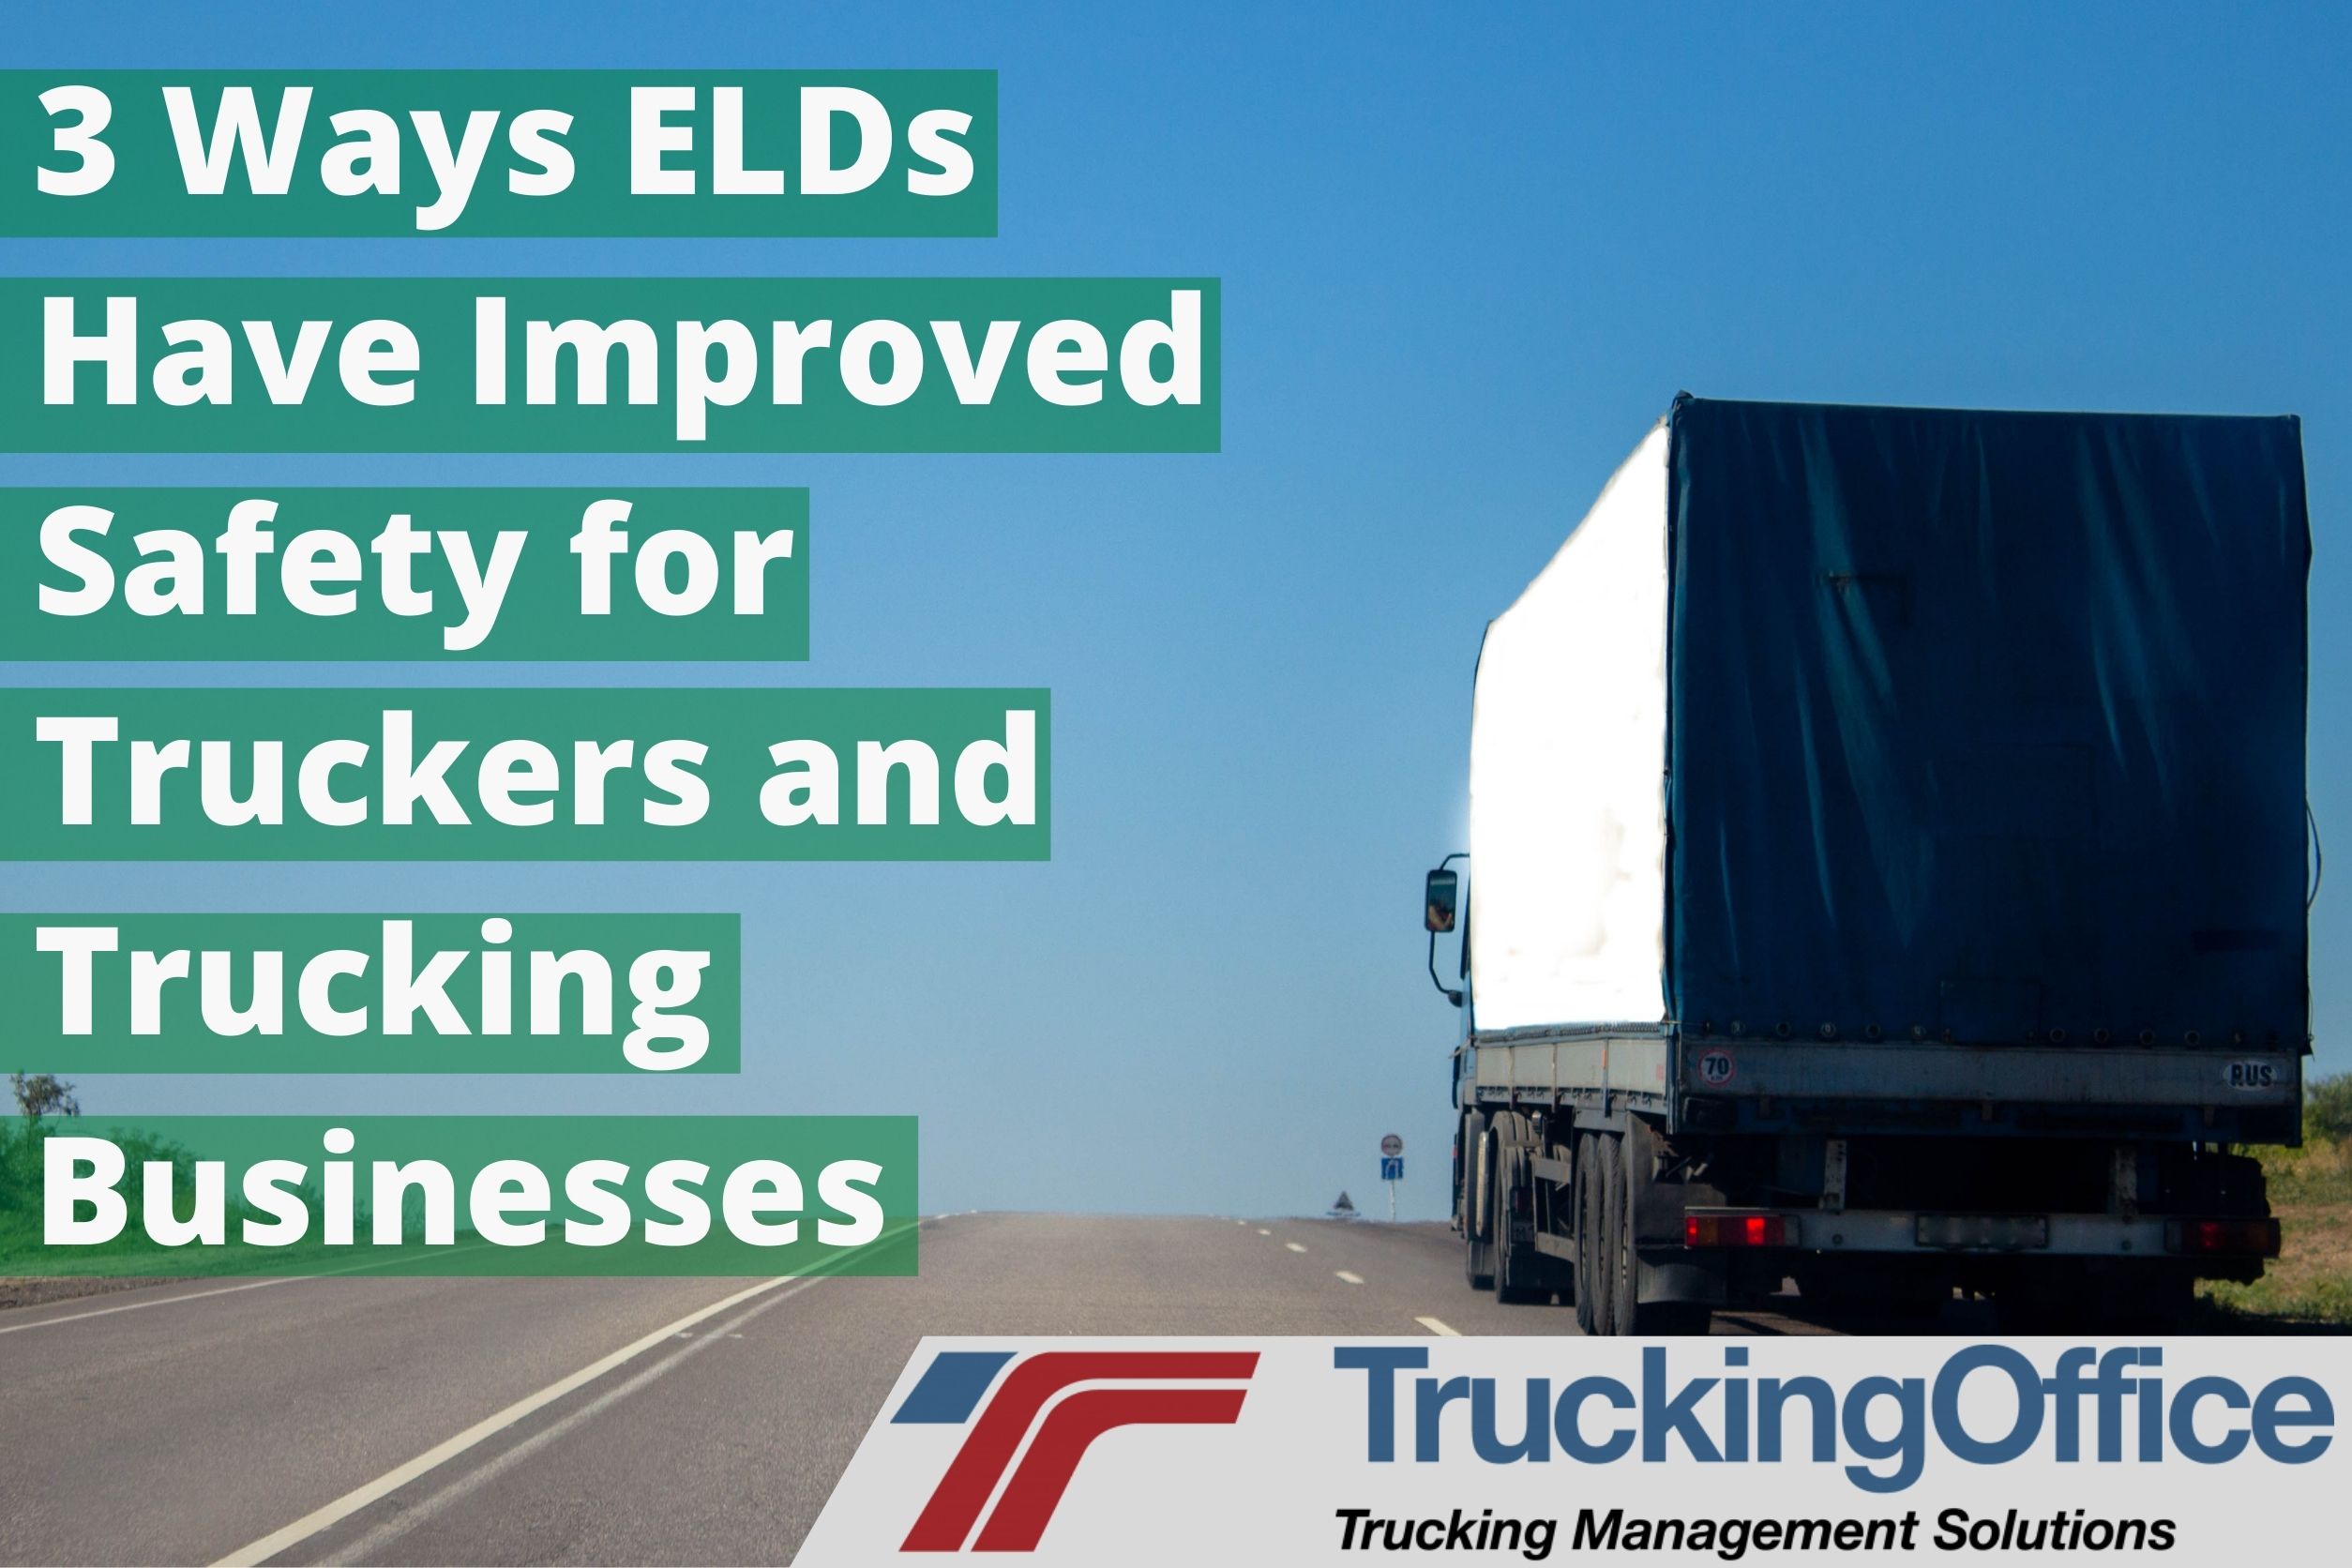 3 Ways ELDs Have Improved Safety for Truckers and Trucking Businesses